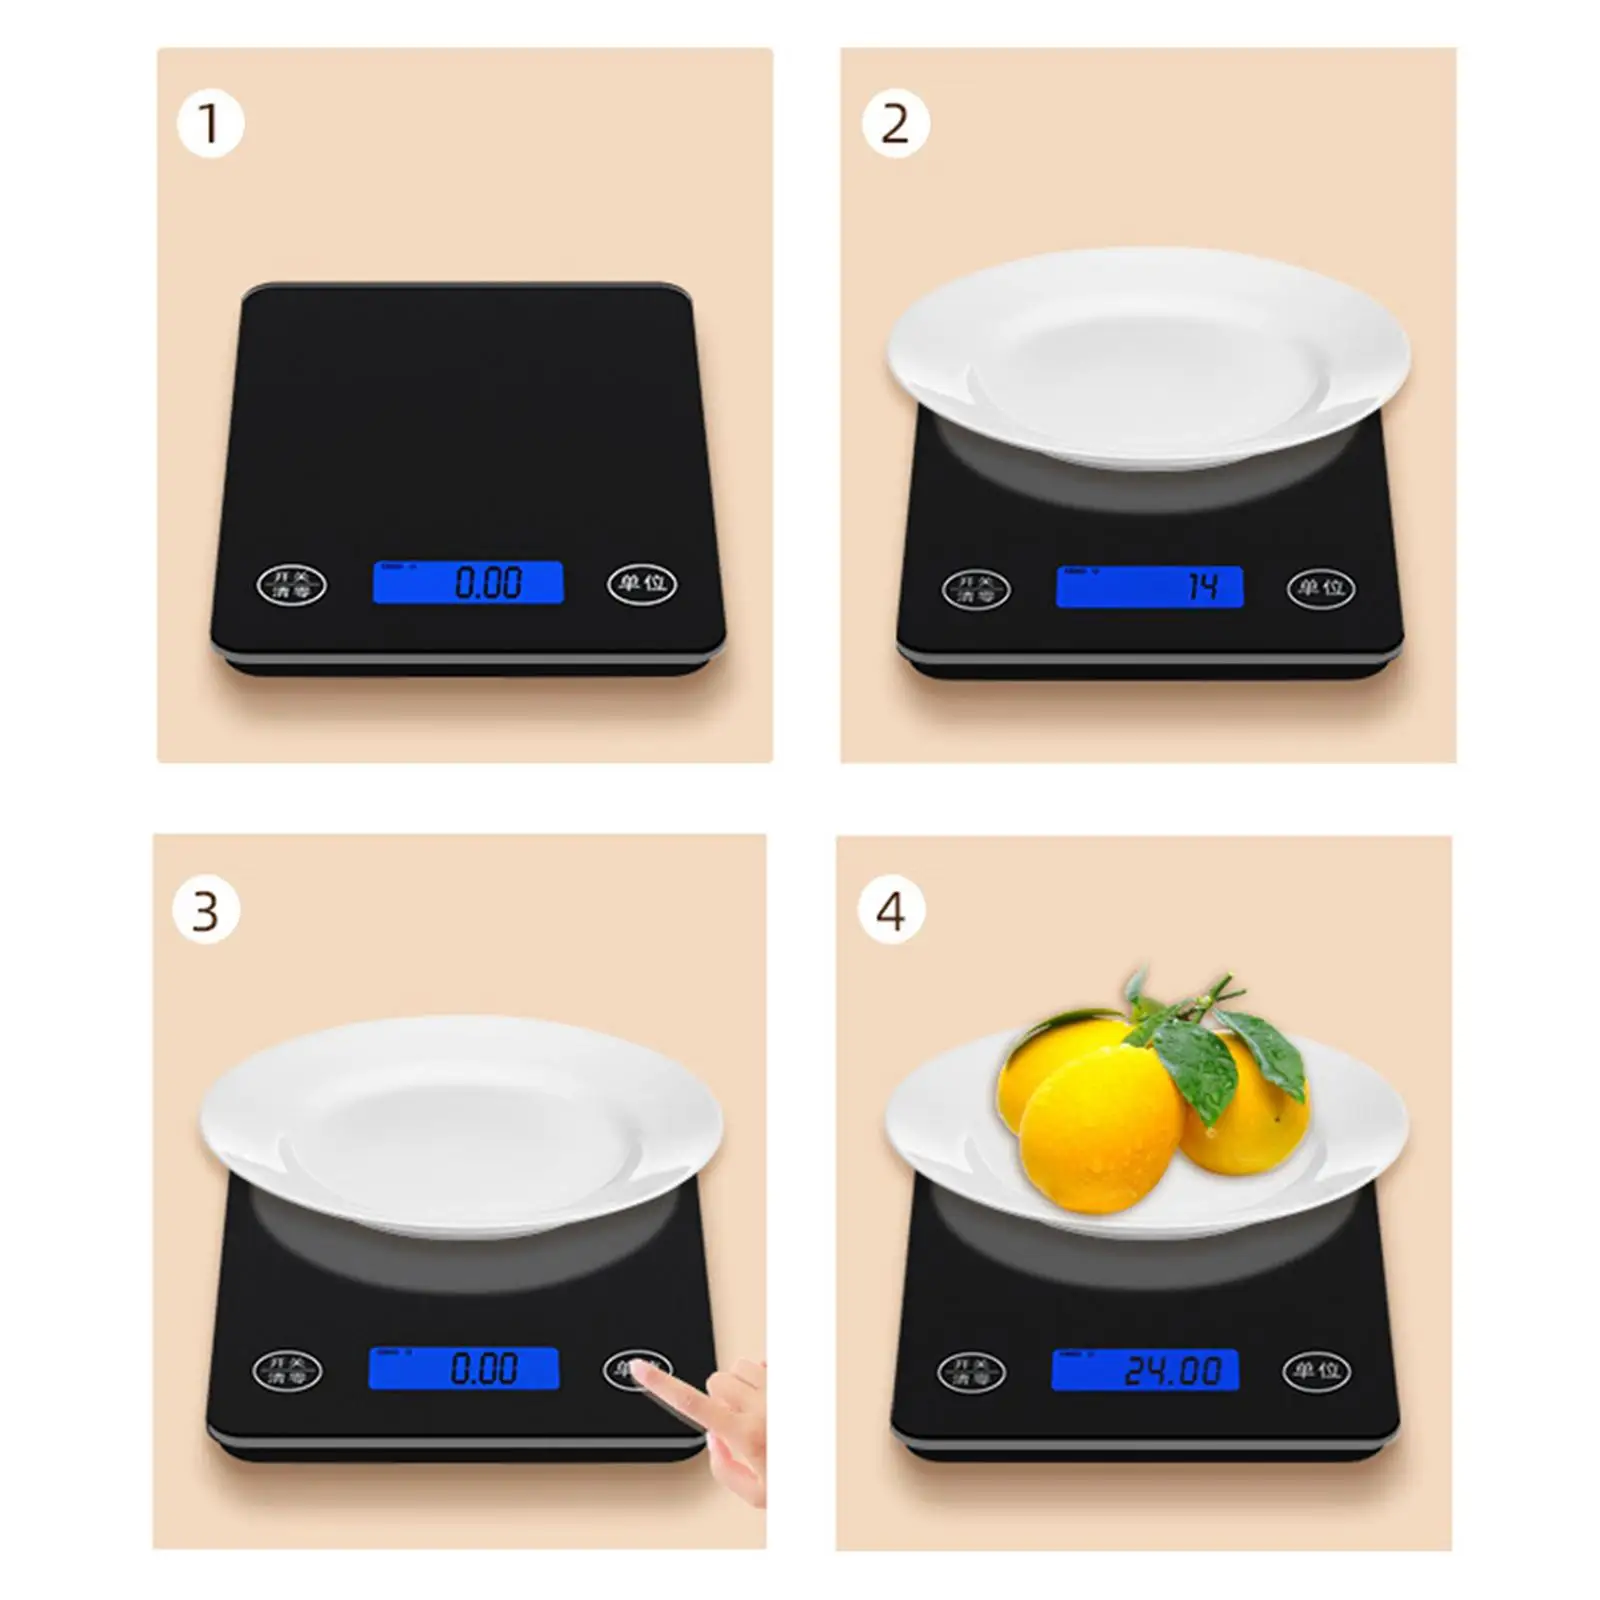 Multifunction Food Scale ml/ct/kg/G/oz/lb/TL LCD Display Multiple Measurement Units Pocket Scale for Kitchen Baking